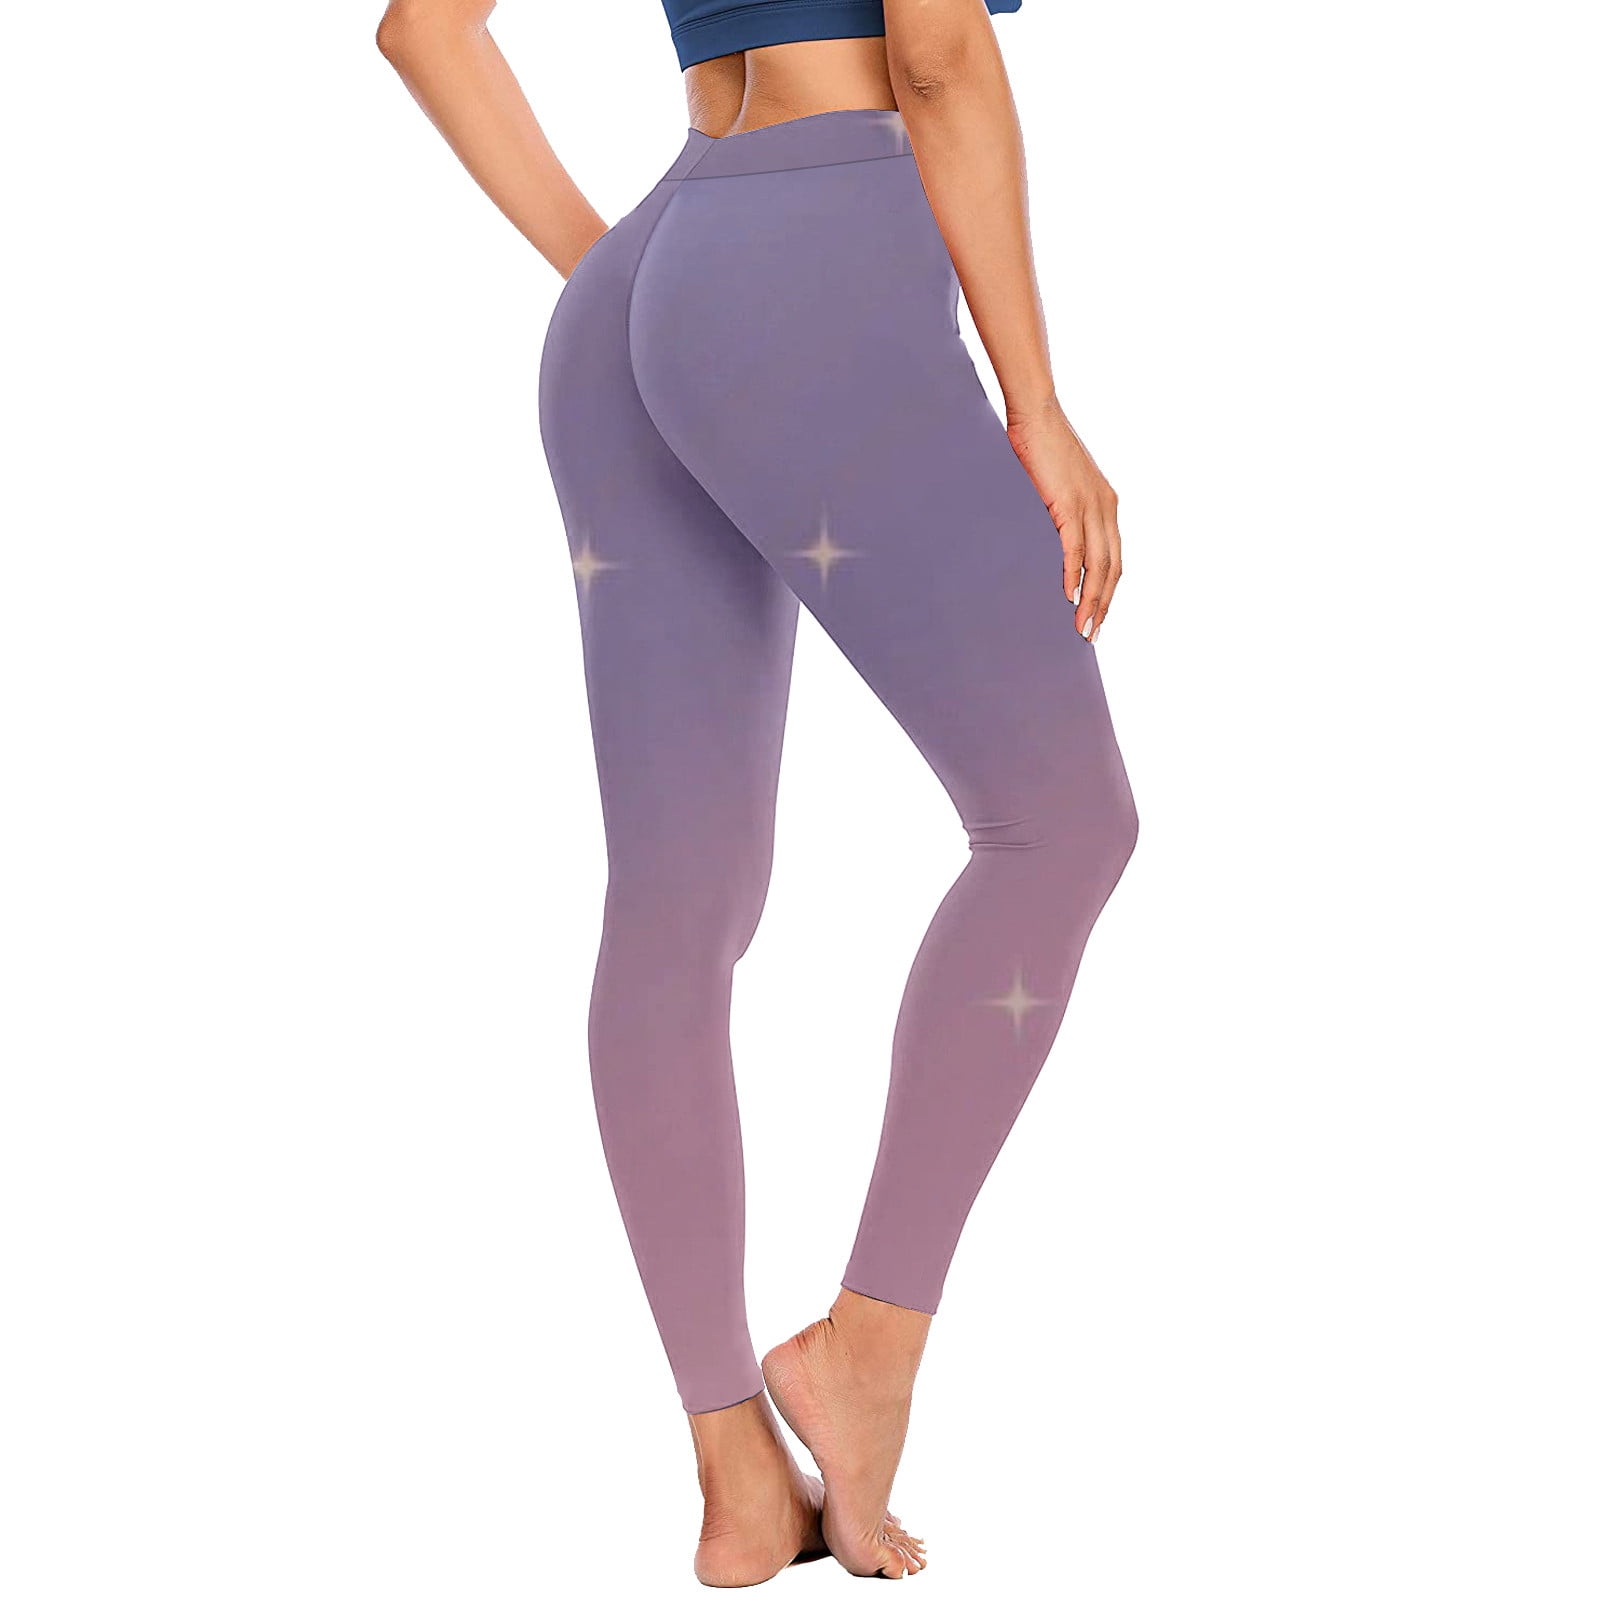 YWDJ Tights for Women Workout Butt Lifting Gym Long Length High Waist  Casual Sports Yogalicious Print Patterned Wide Leg Fashion Utility Dressy  Everyday Soft Flower Gradient Printing Purple XXL 